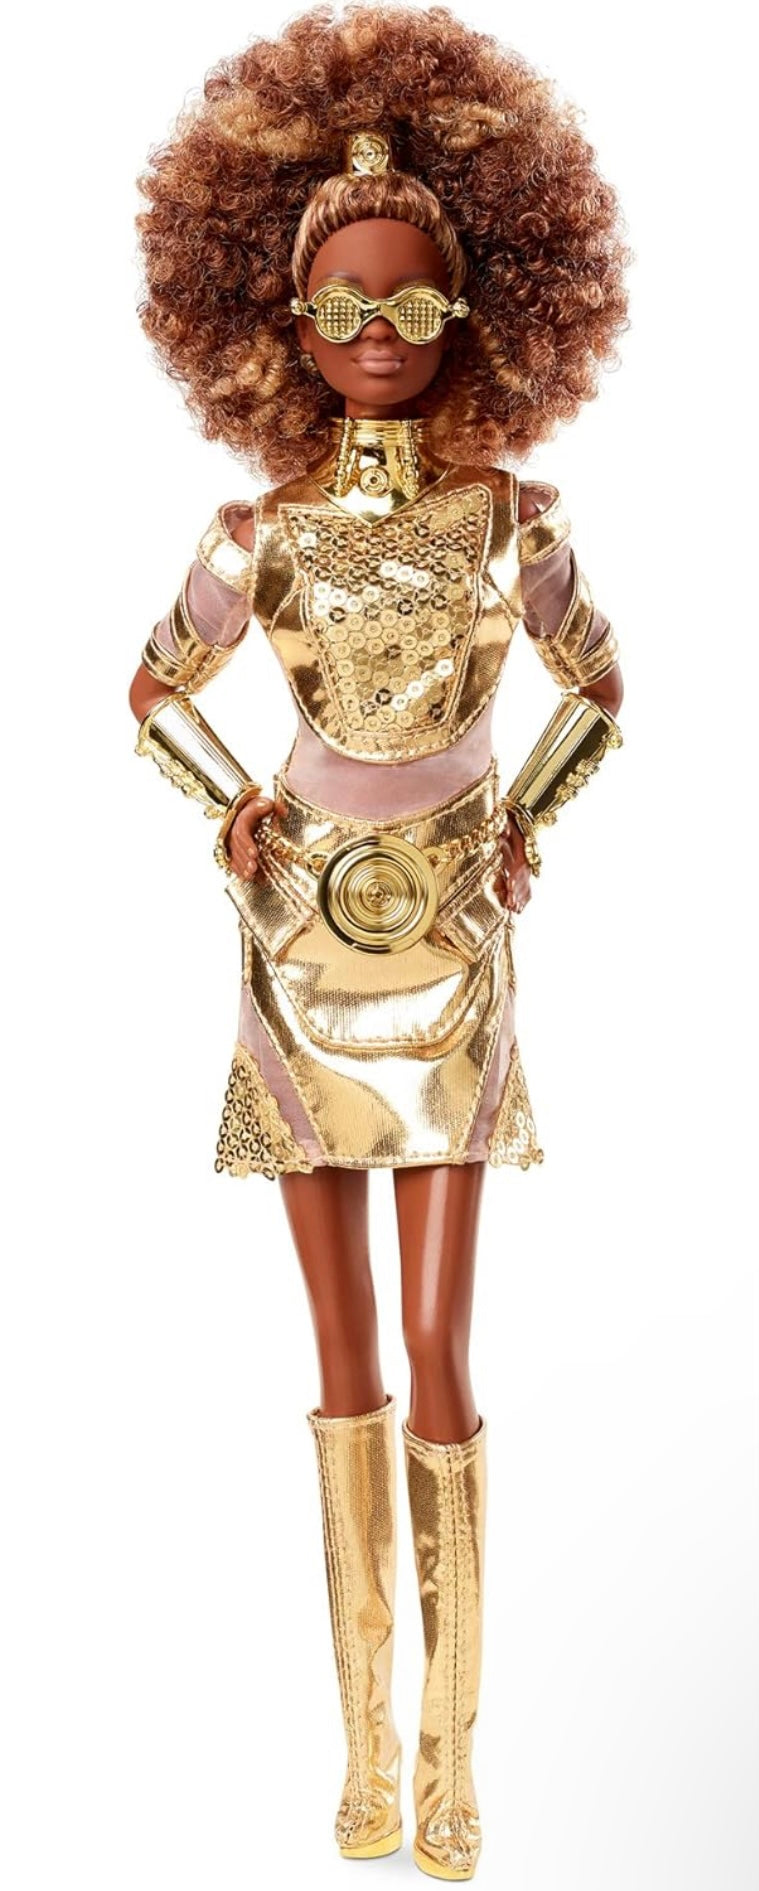 Barbie Collector Star Wars C-3PO x Doll (~12-inch) in Gold Fashion and Accessories, with Doll Stand and Certificate of Authenticity